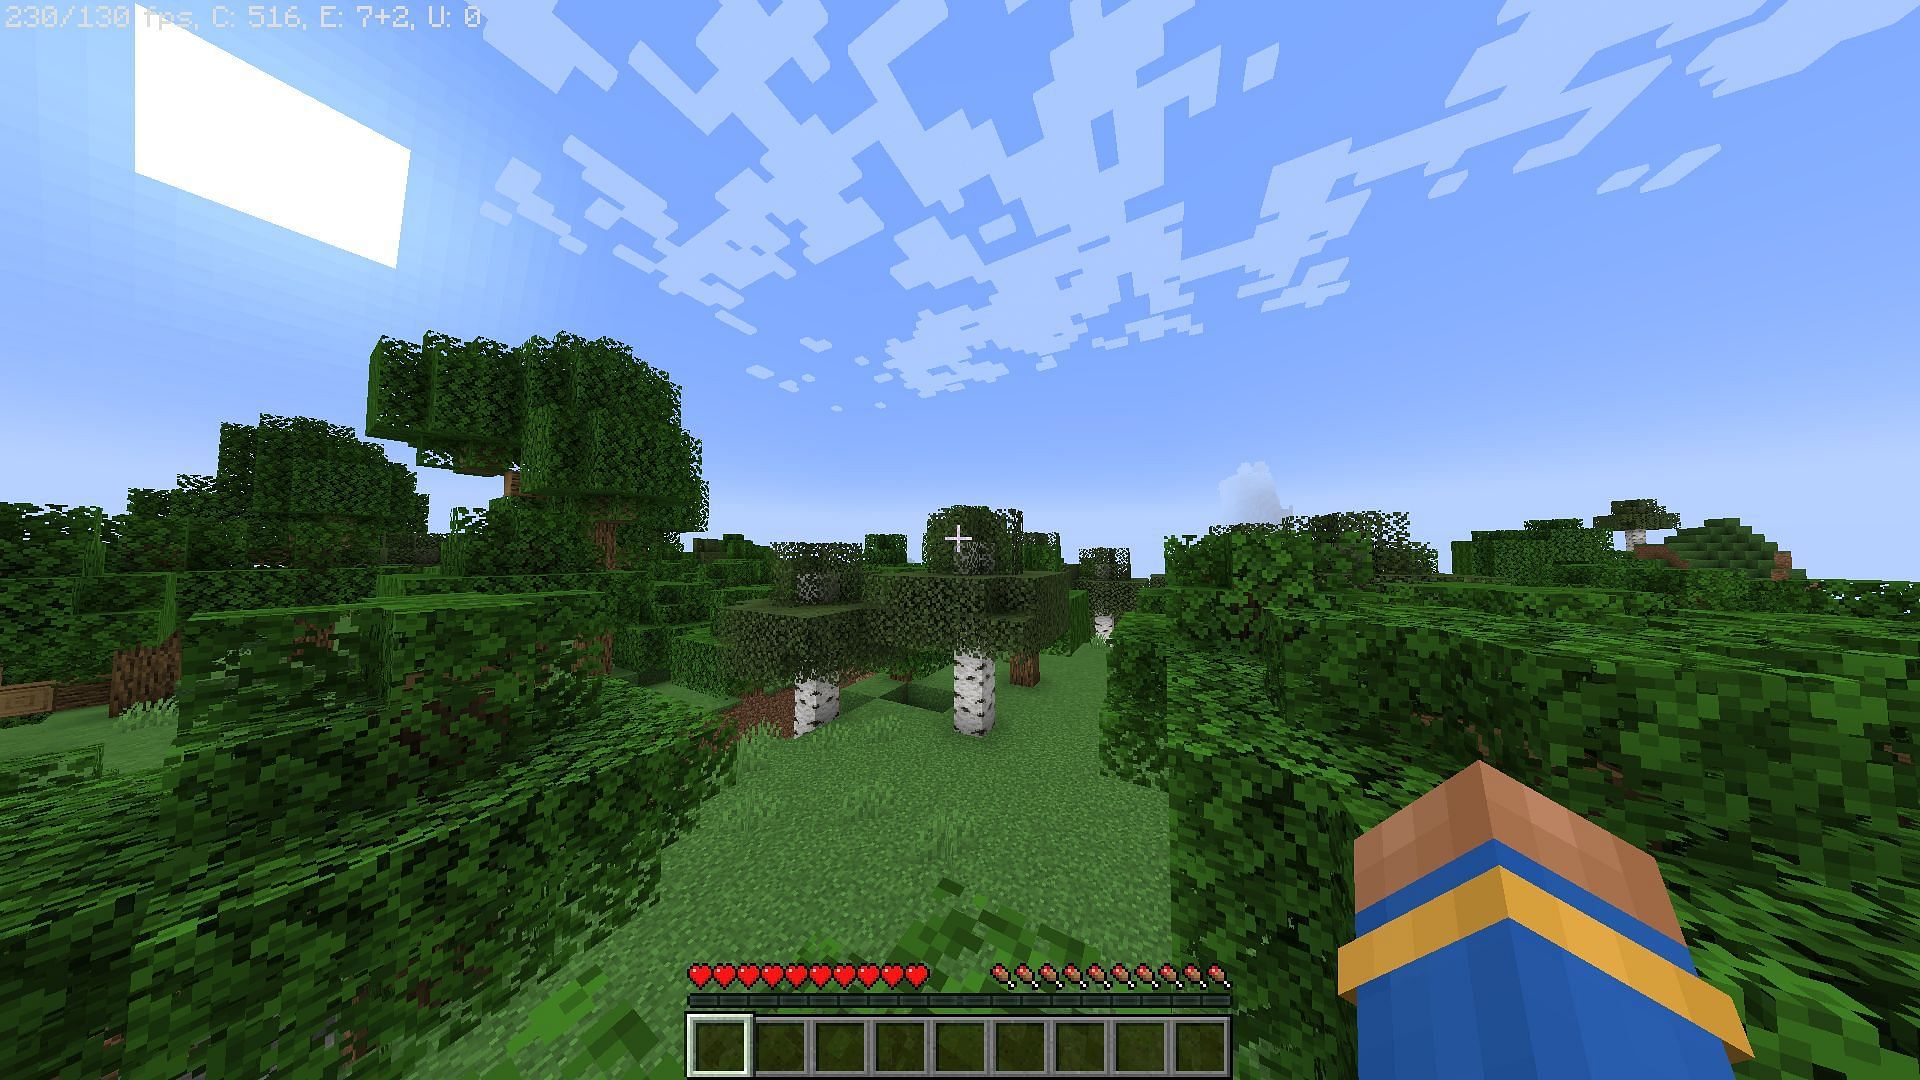 A freshly generated world in Minecraft (Image via Minecraft)